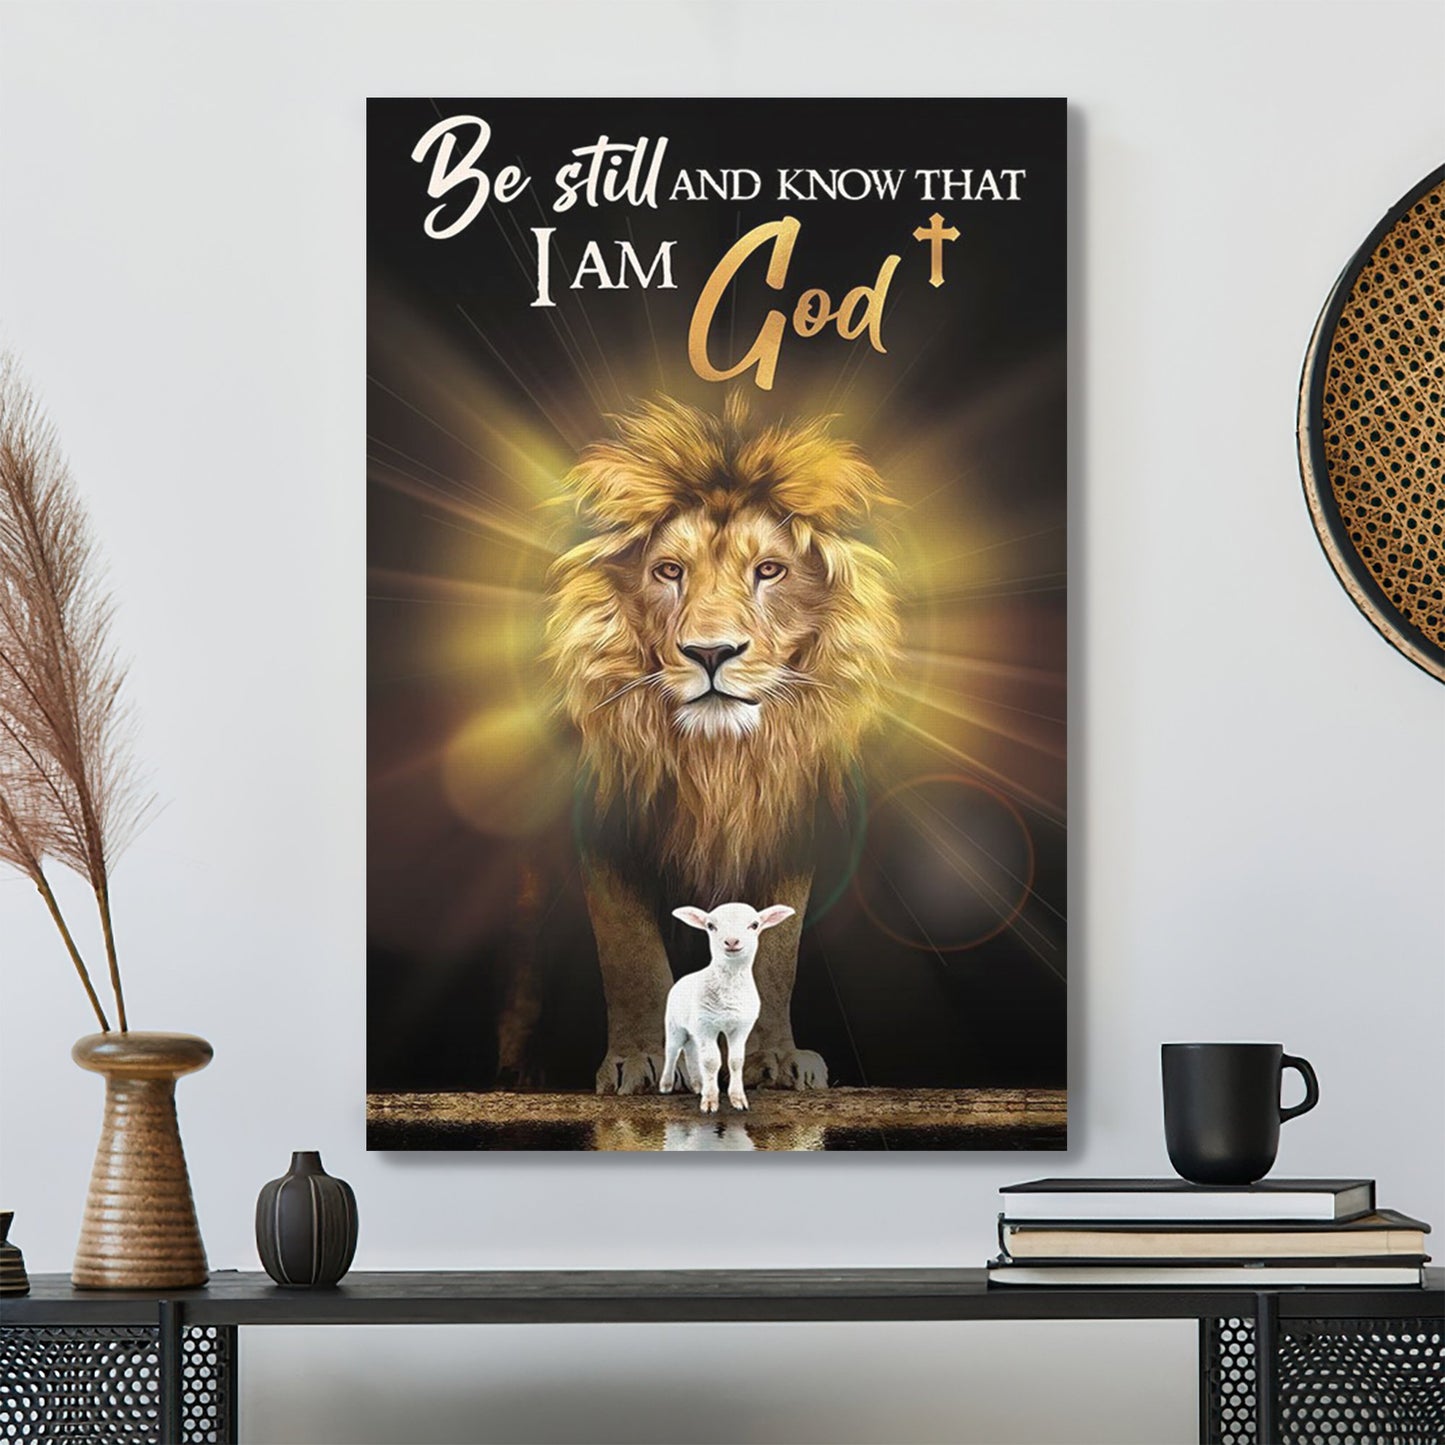 Christian Canvas Art - God Canvas - Be Still And Know That I Am God - Lion And Lamp Canvas - Scripture Canvas - Ciaocustom